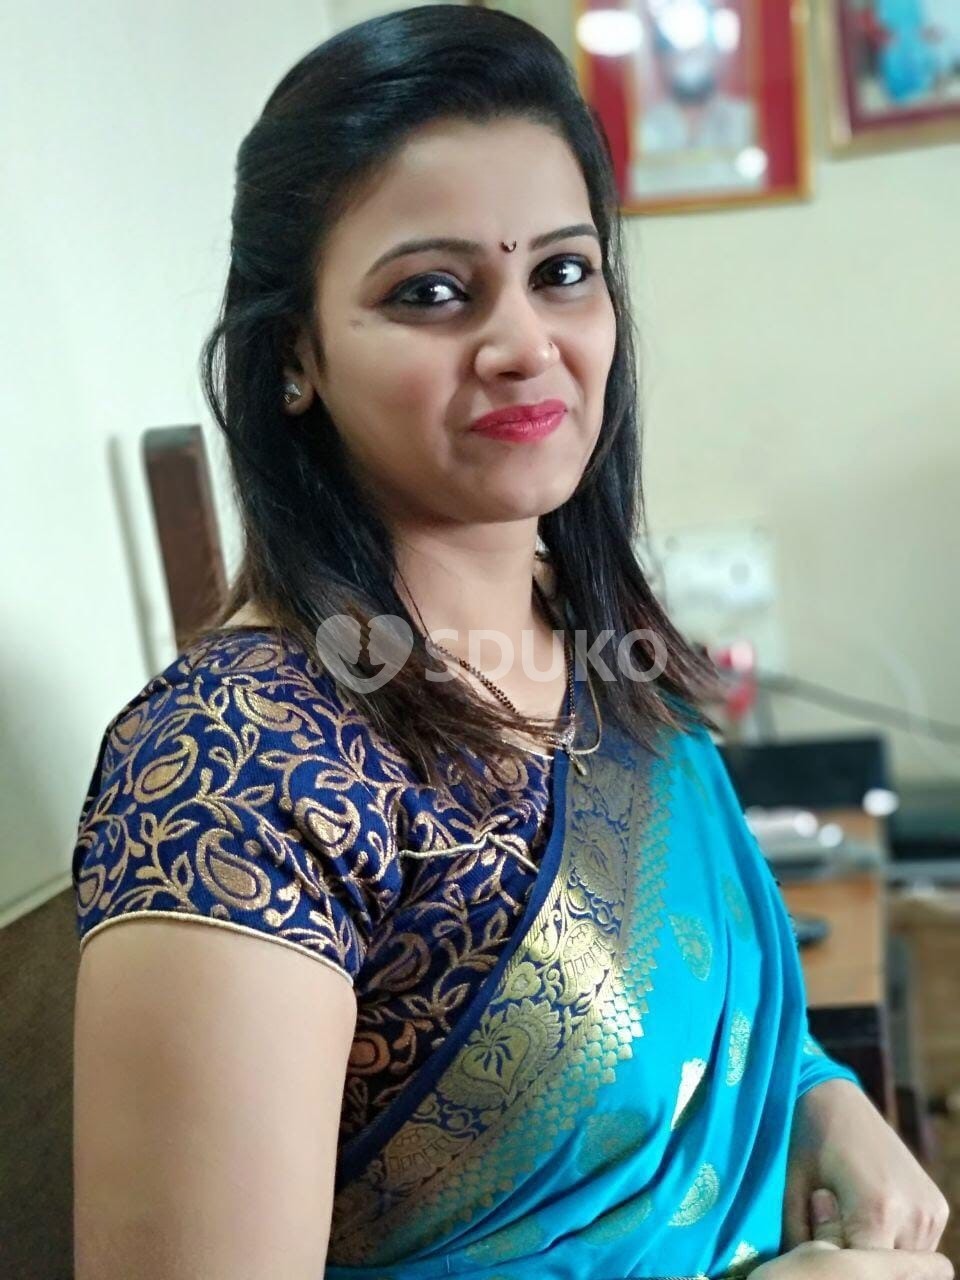 Kukatpally............low price 🥰100% SAFE AND SECURE TODAY LOW PRICE UNLIMITED ENJOY HOT COLLEGE GIRL HOUSEWIFE AUNT